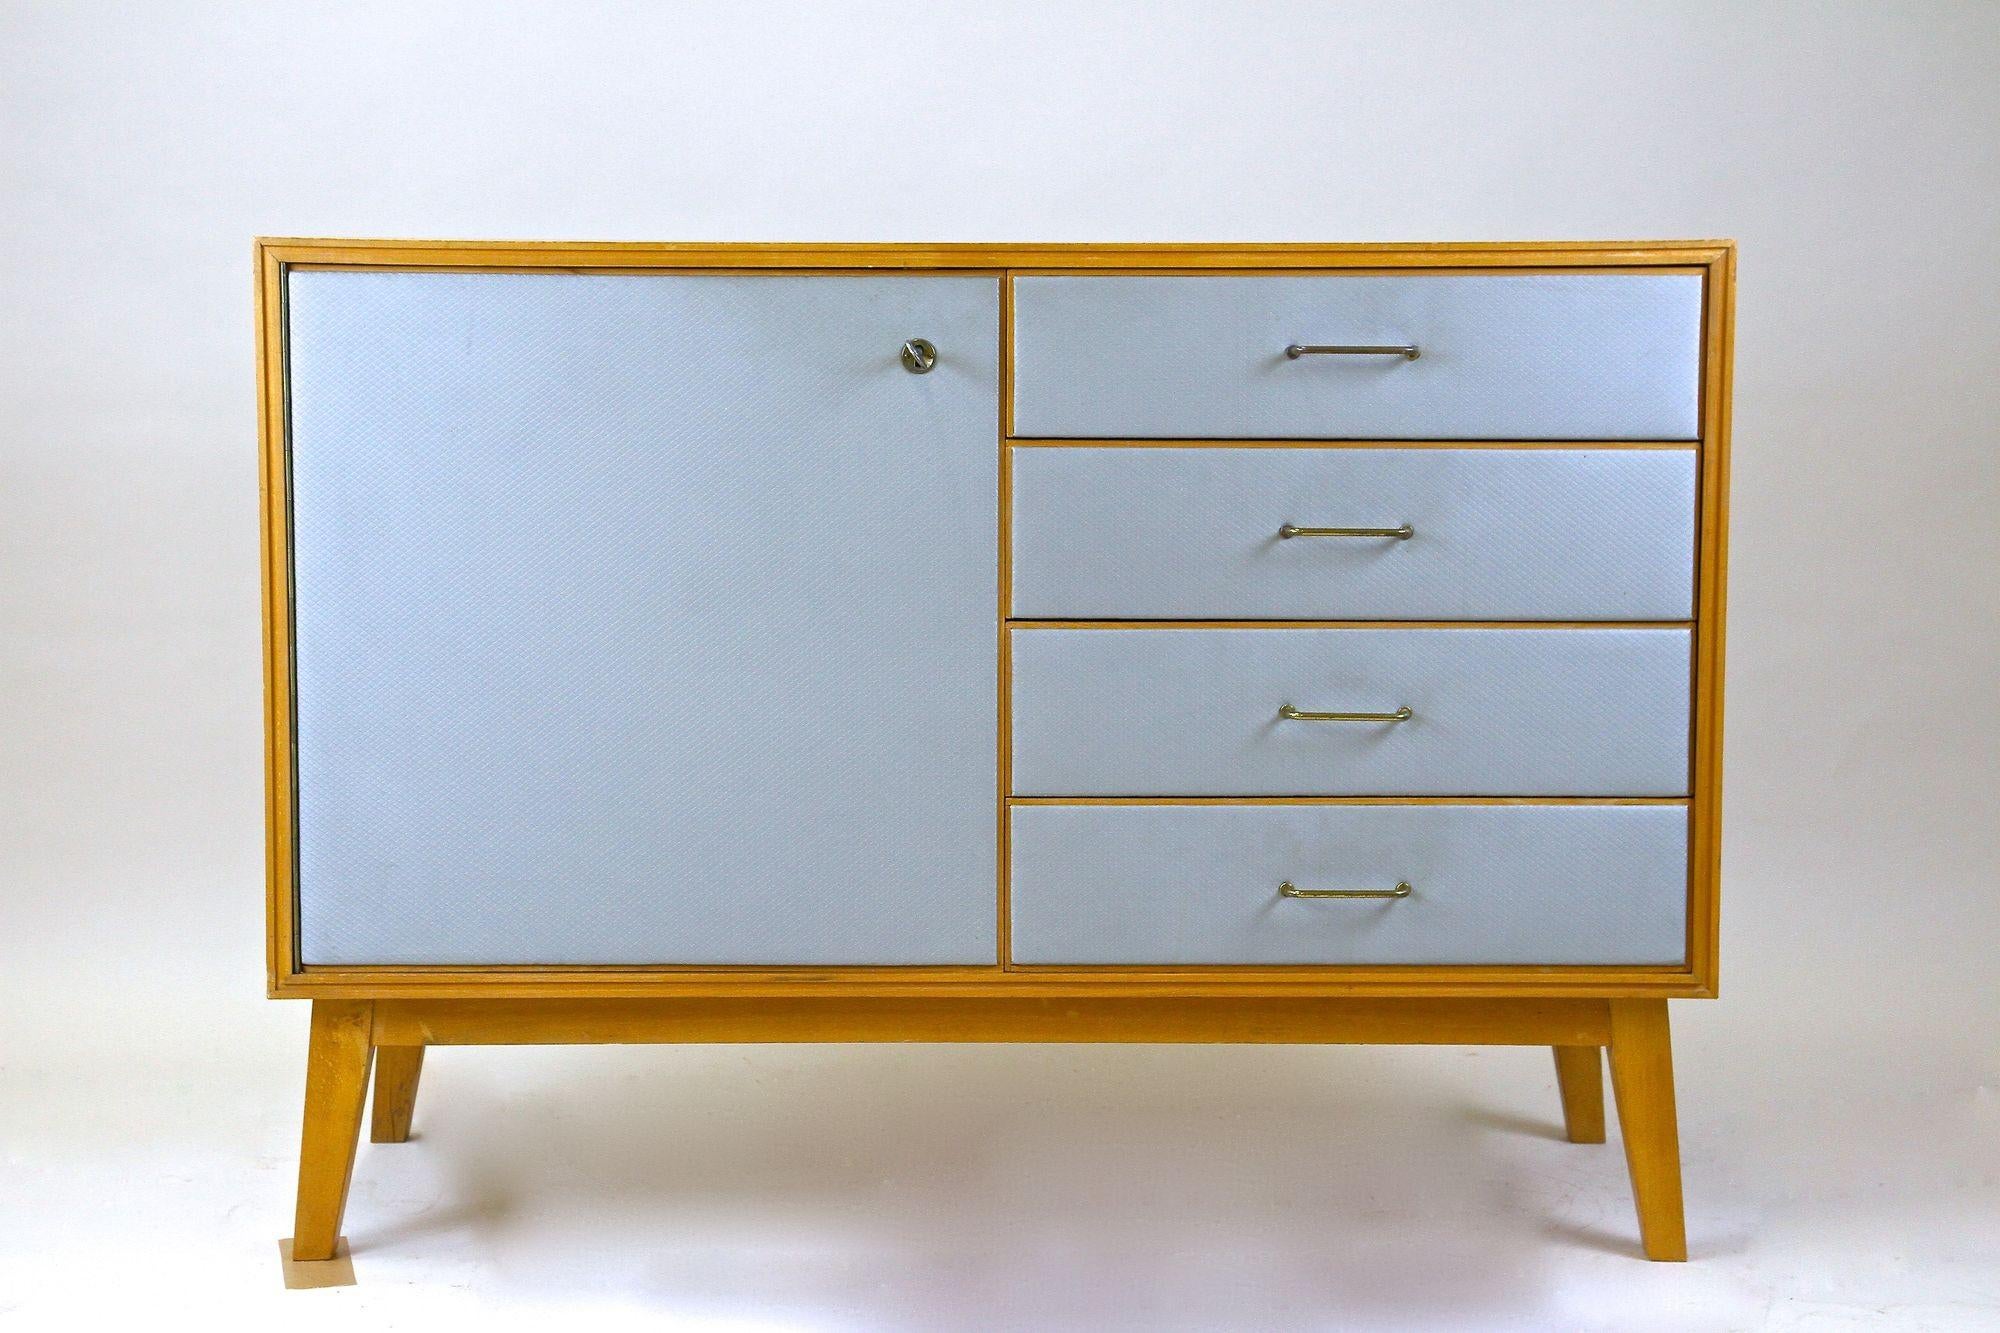 Extraordinary mid-century commode or chest of drawers with powder blue fronts made by SW Furniture in Vienna/ Austria around 1960. A perfect sized commode unusually crafted out of oriented strand boards which confers this uncommon piece of